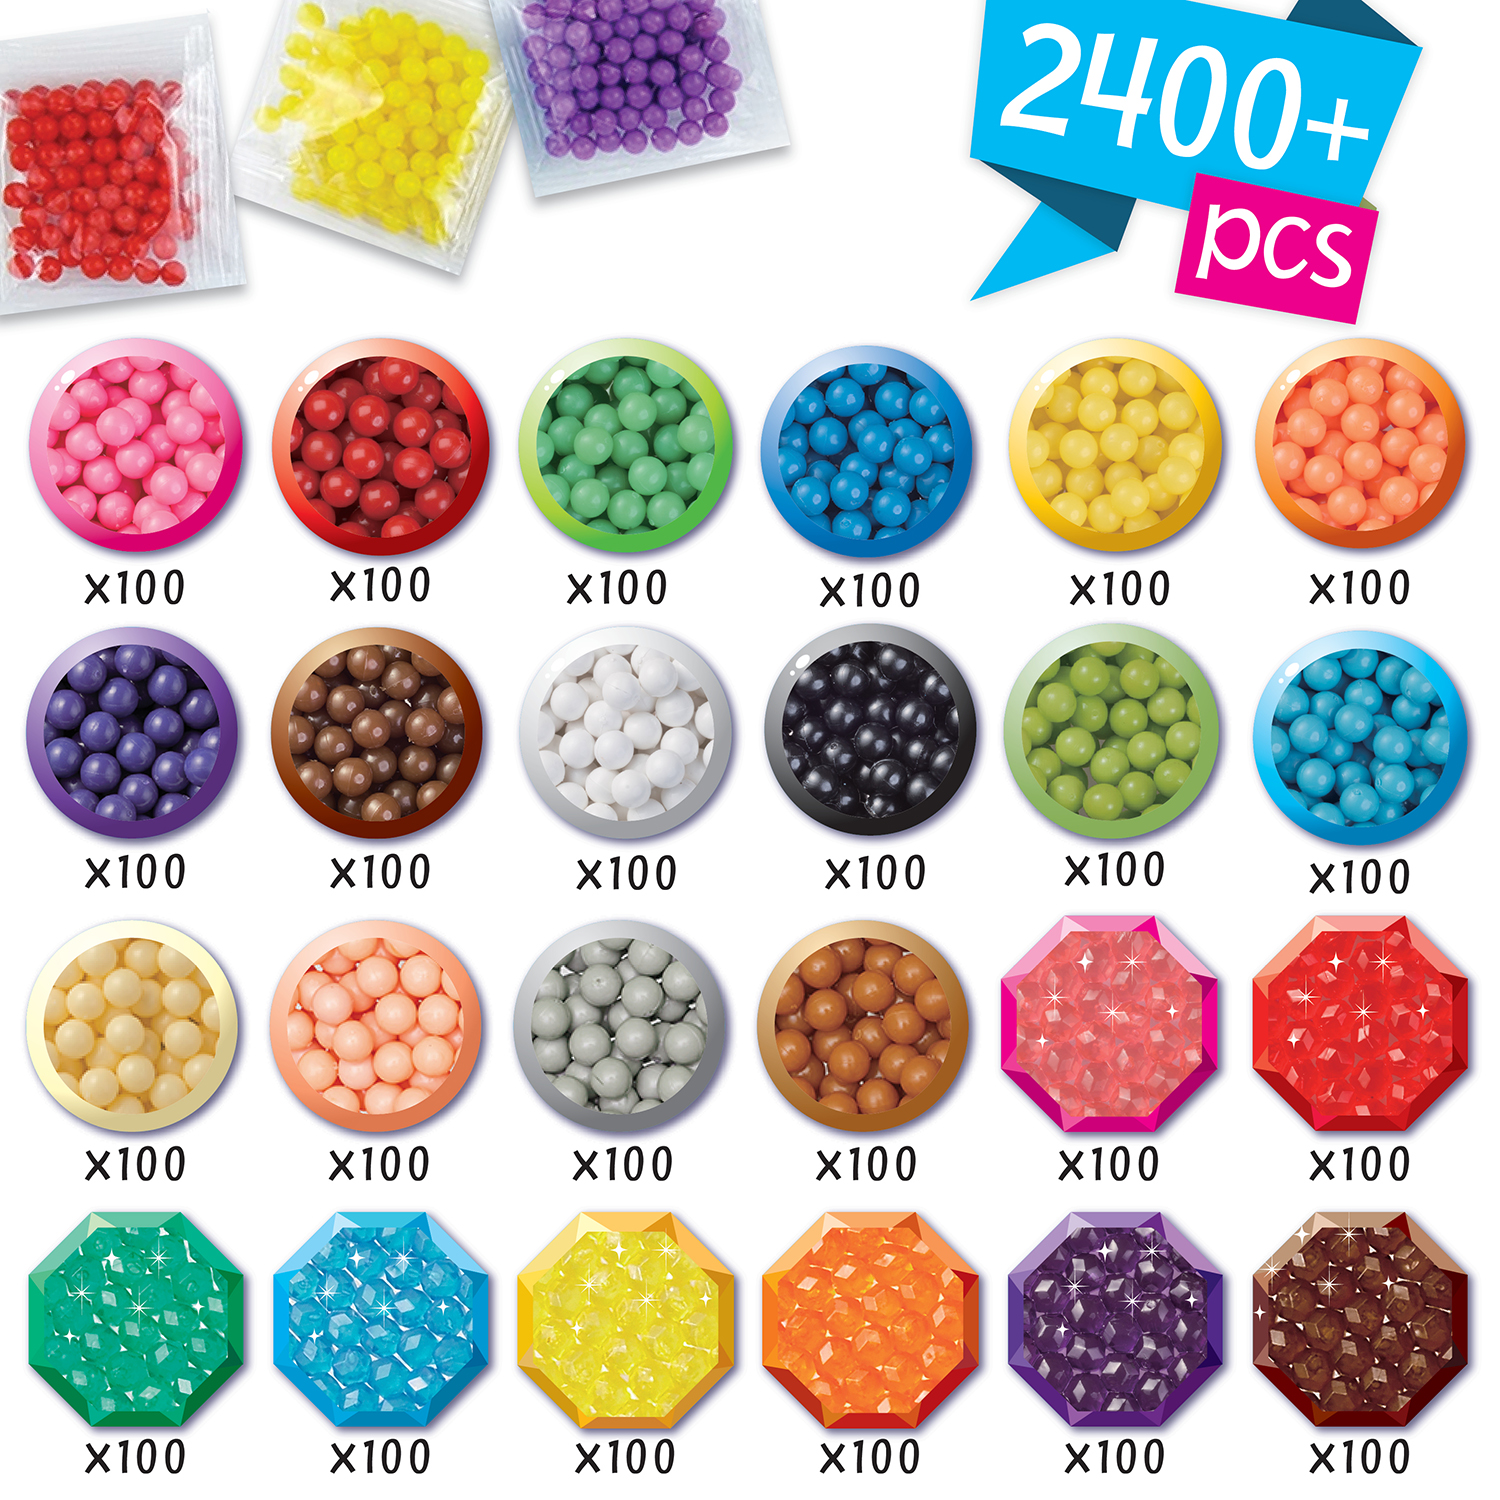 Aquabeads Mega Bead Refill Pack, Arts & Crafts Bead Refill Kit for Children - over 2,400 beads and shooting star storage case - image 6 of 6